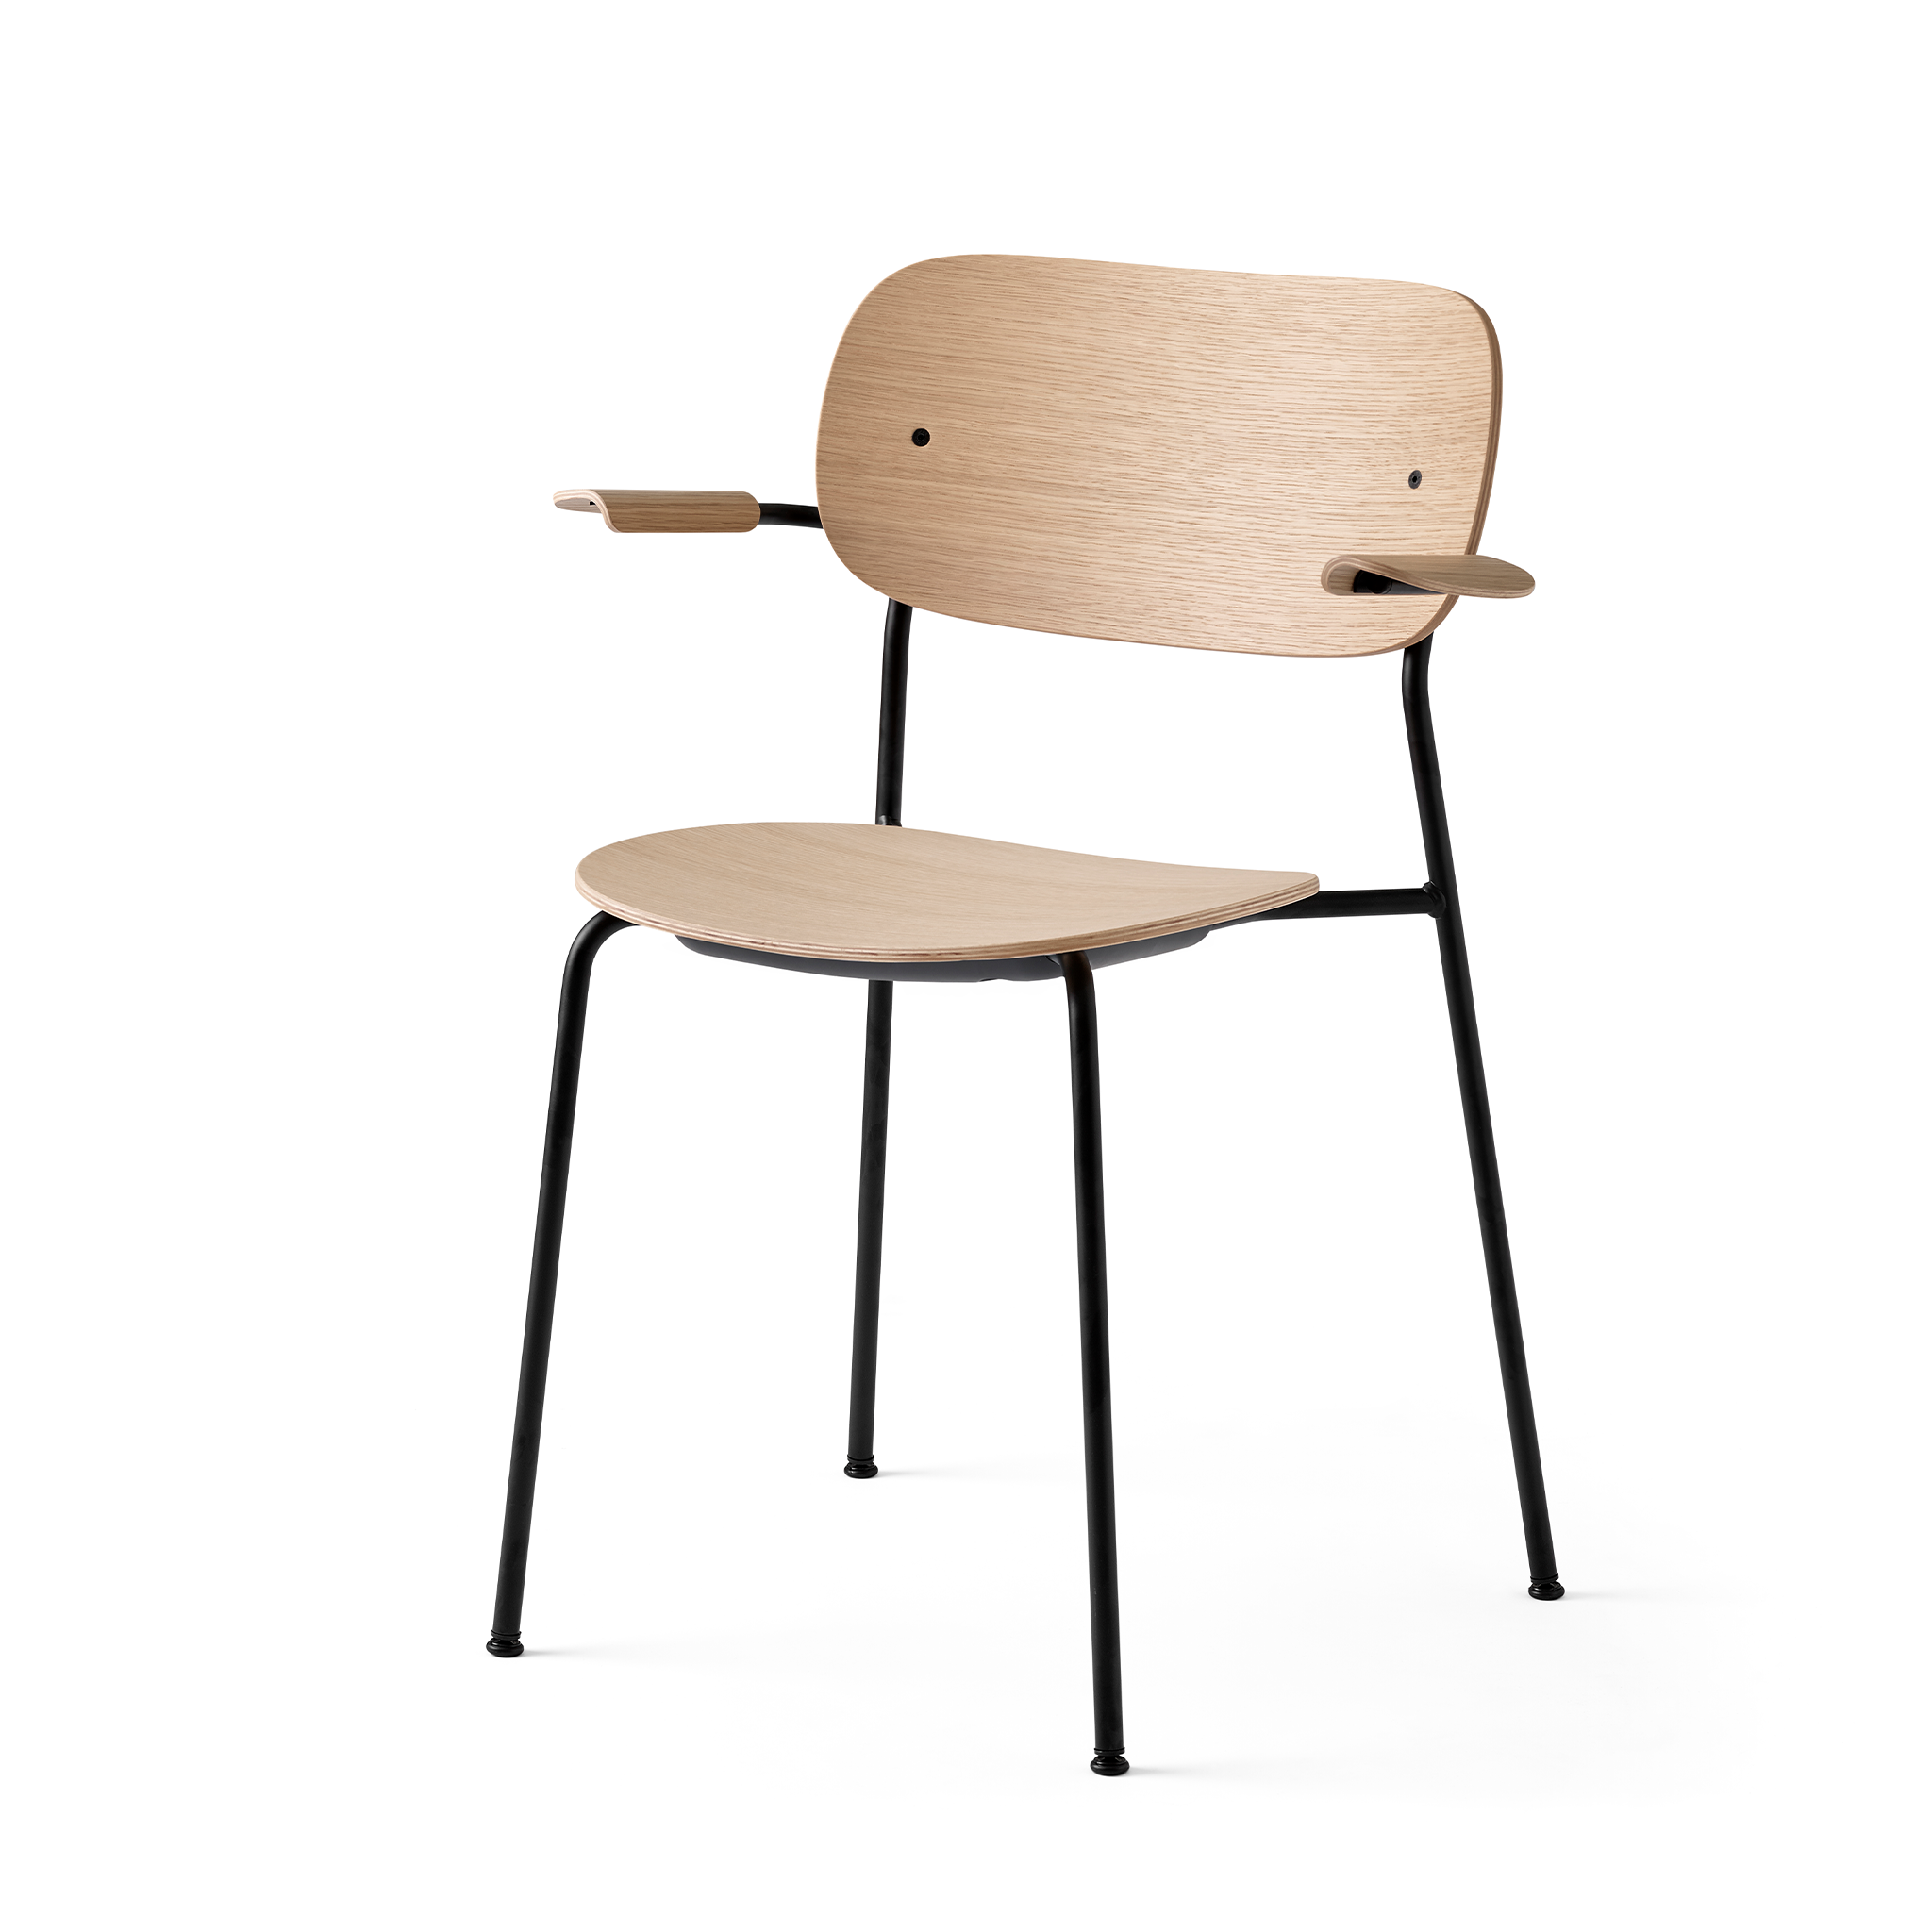 Co Chair, Un-Upholstered With Armrests by Norm Architects & Els Van Hoorebeeck